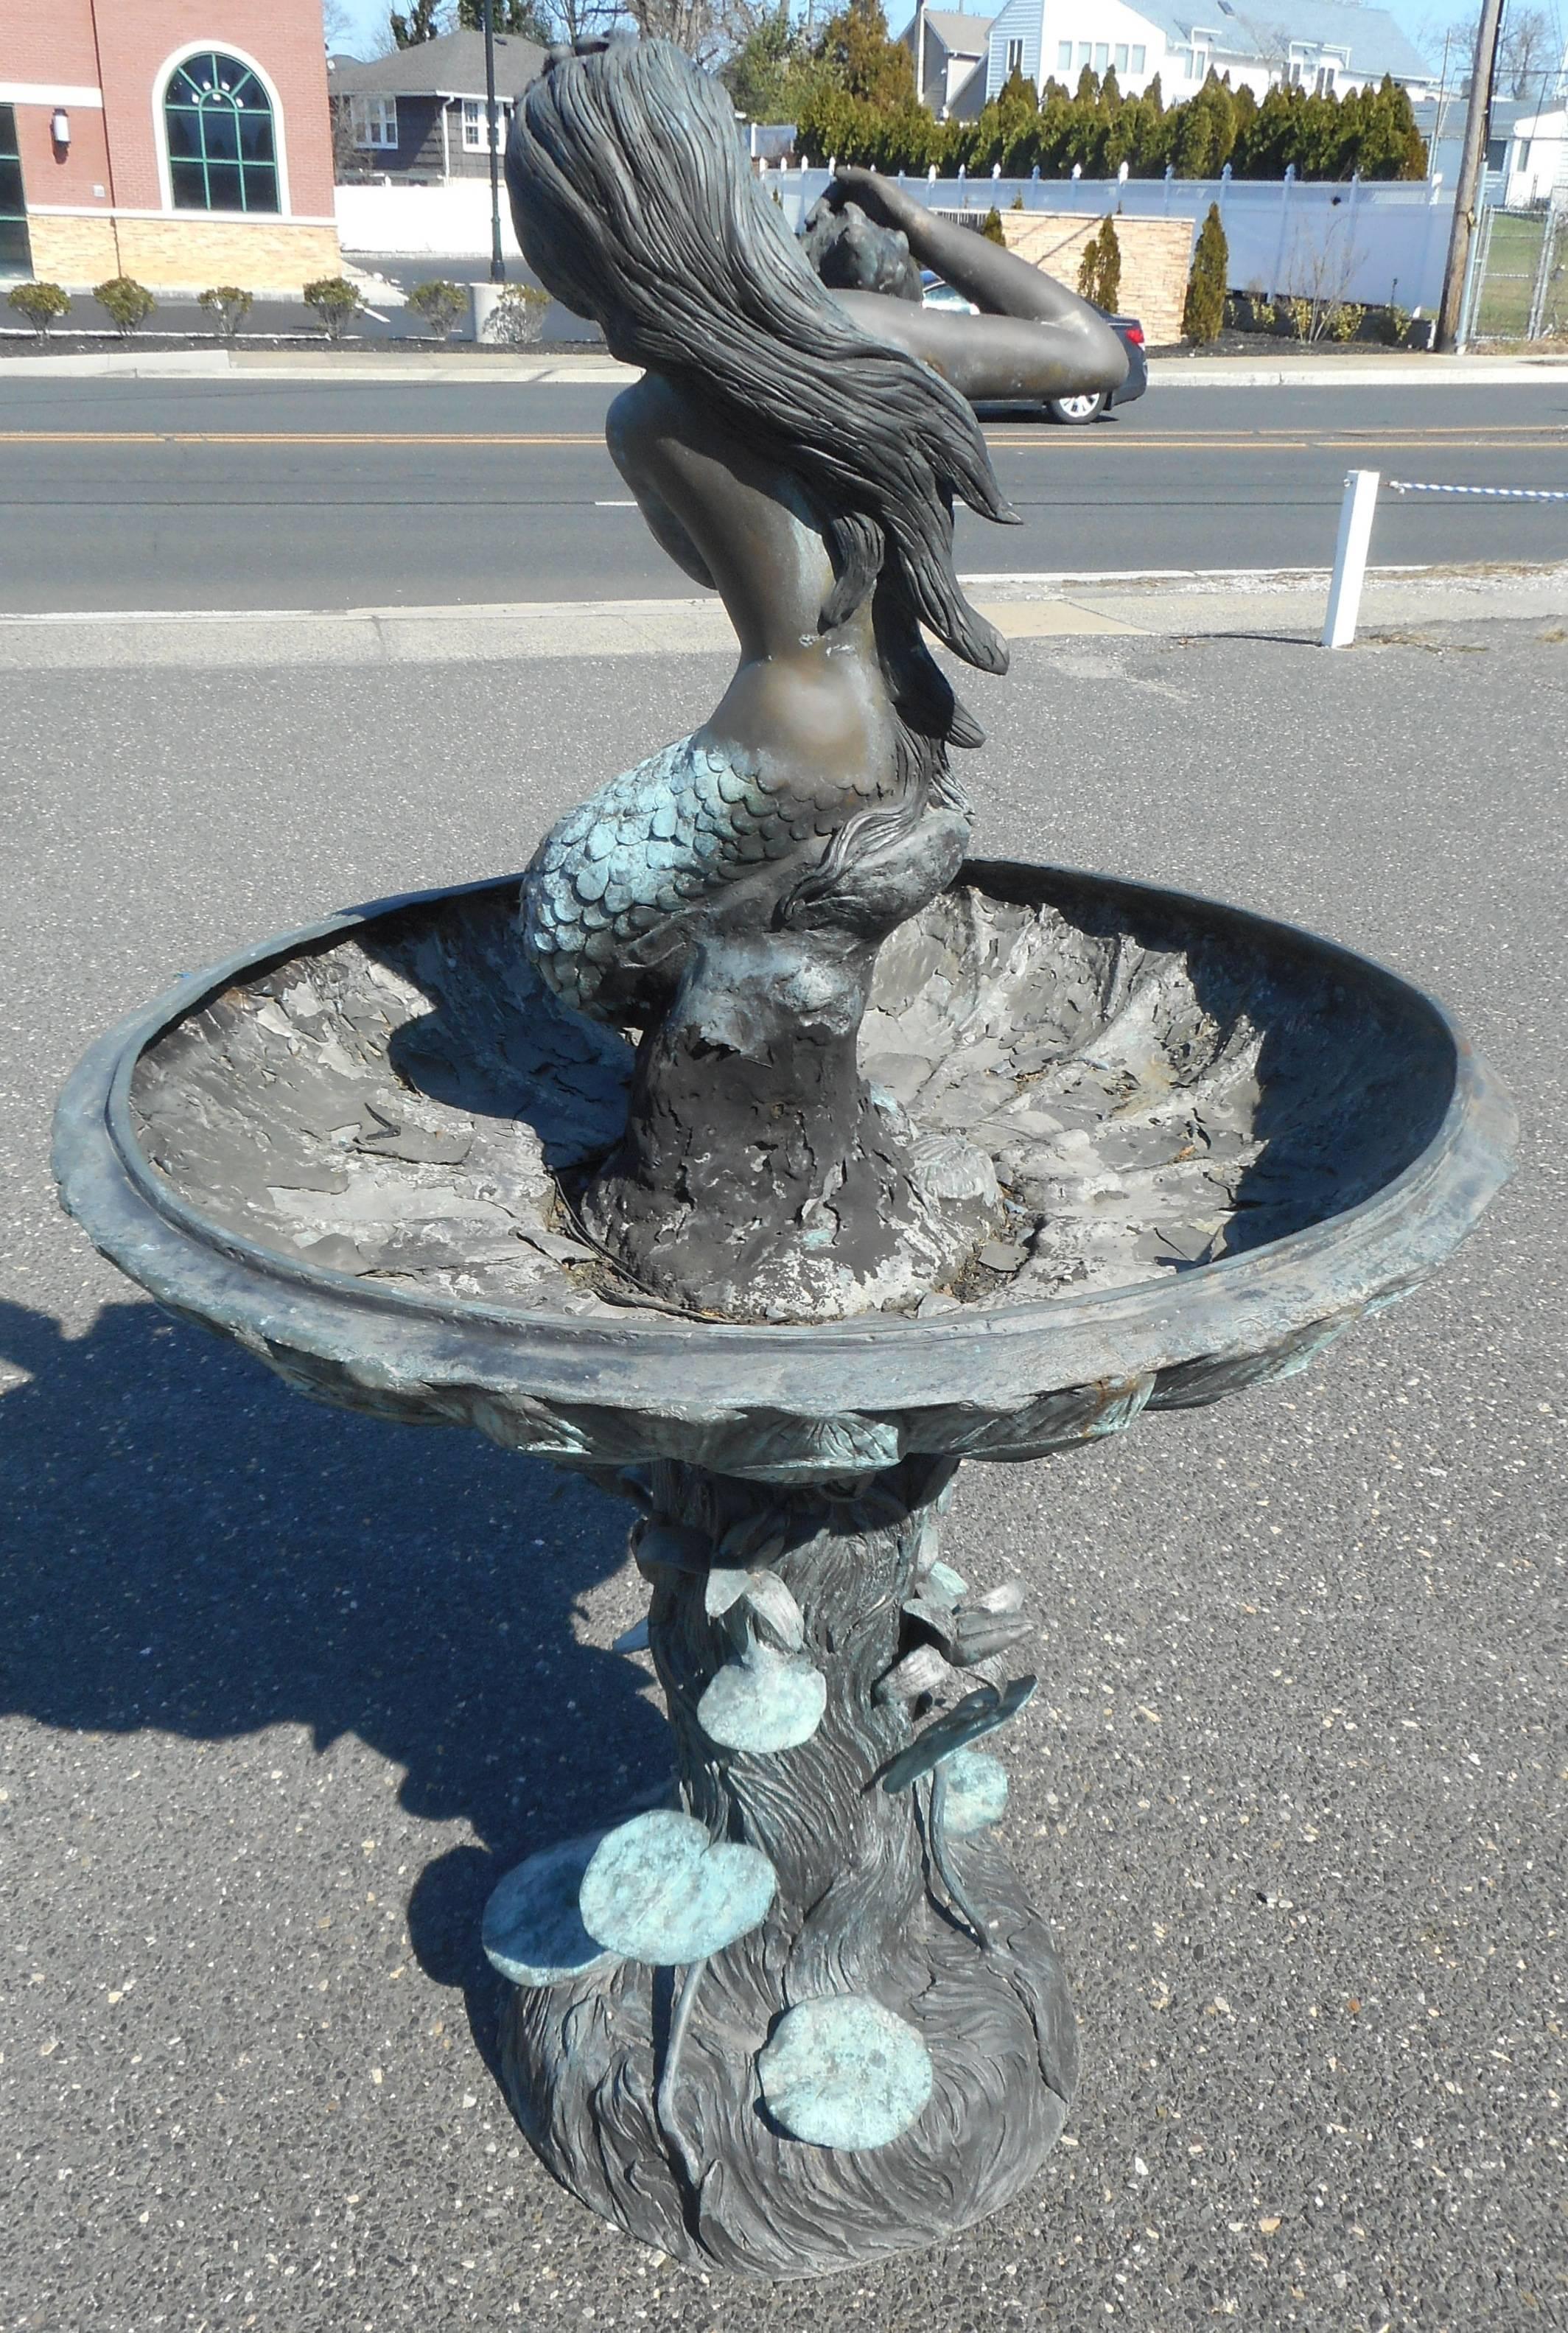 This beautiful bronze mermaid fountain features a mermaid perched on the top with a shell that spills water into the reservoir below. The unique base resembles a mound with flowers and lily pads. Elegant design with intricate detail on beautifully